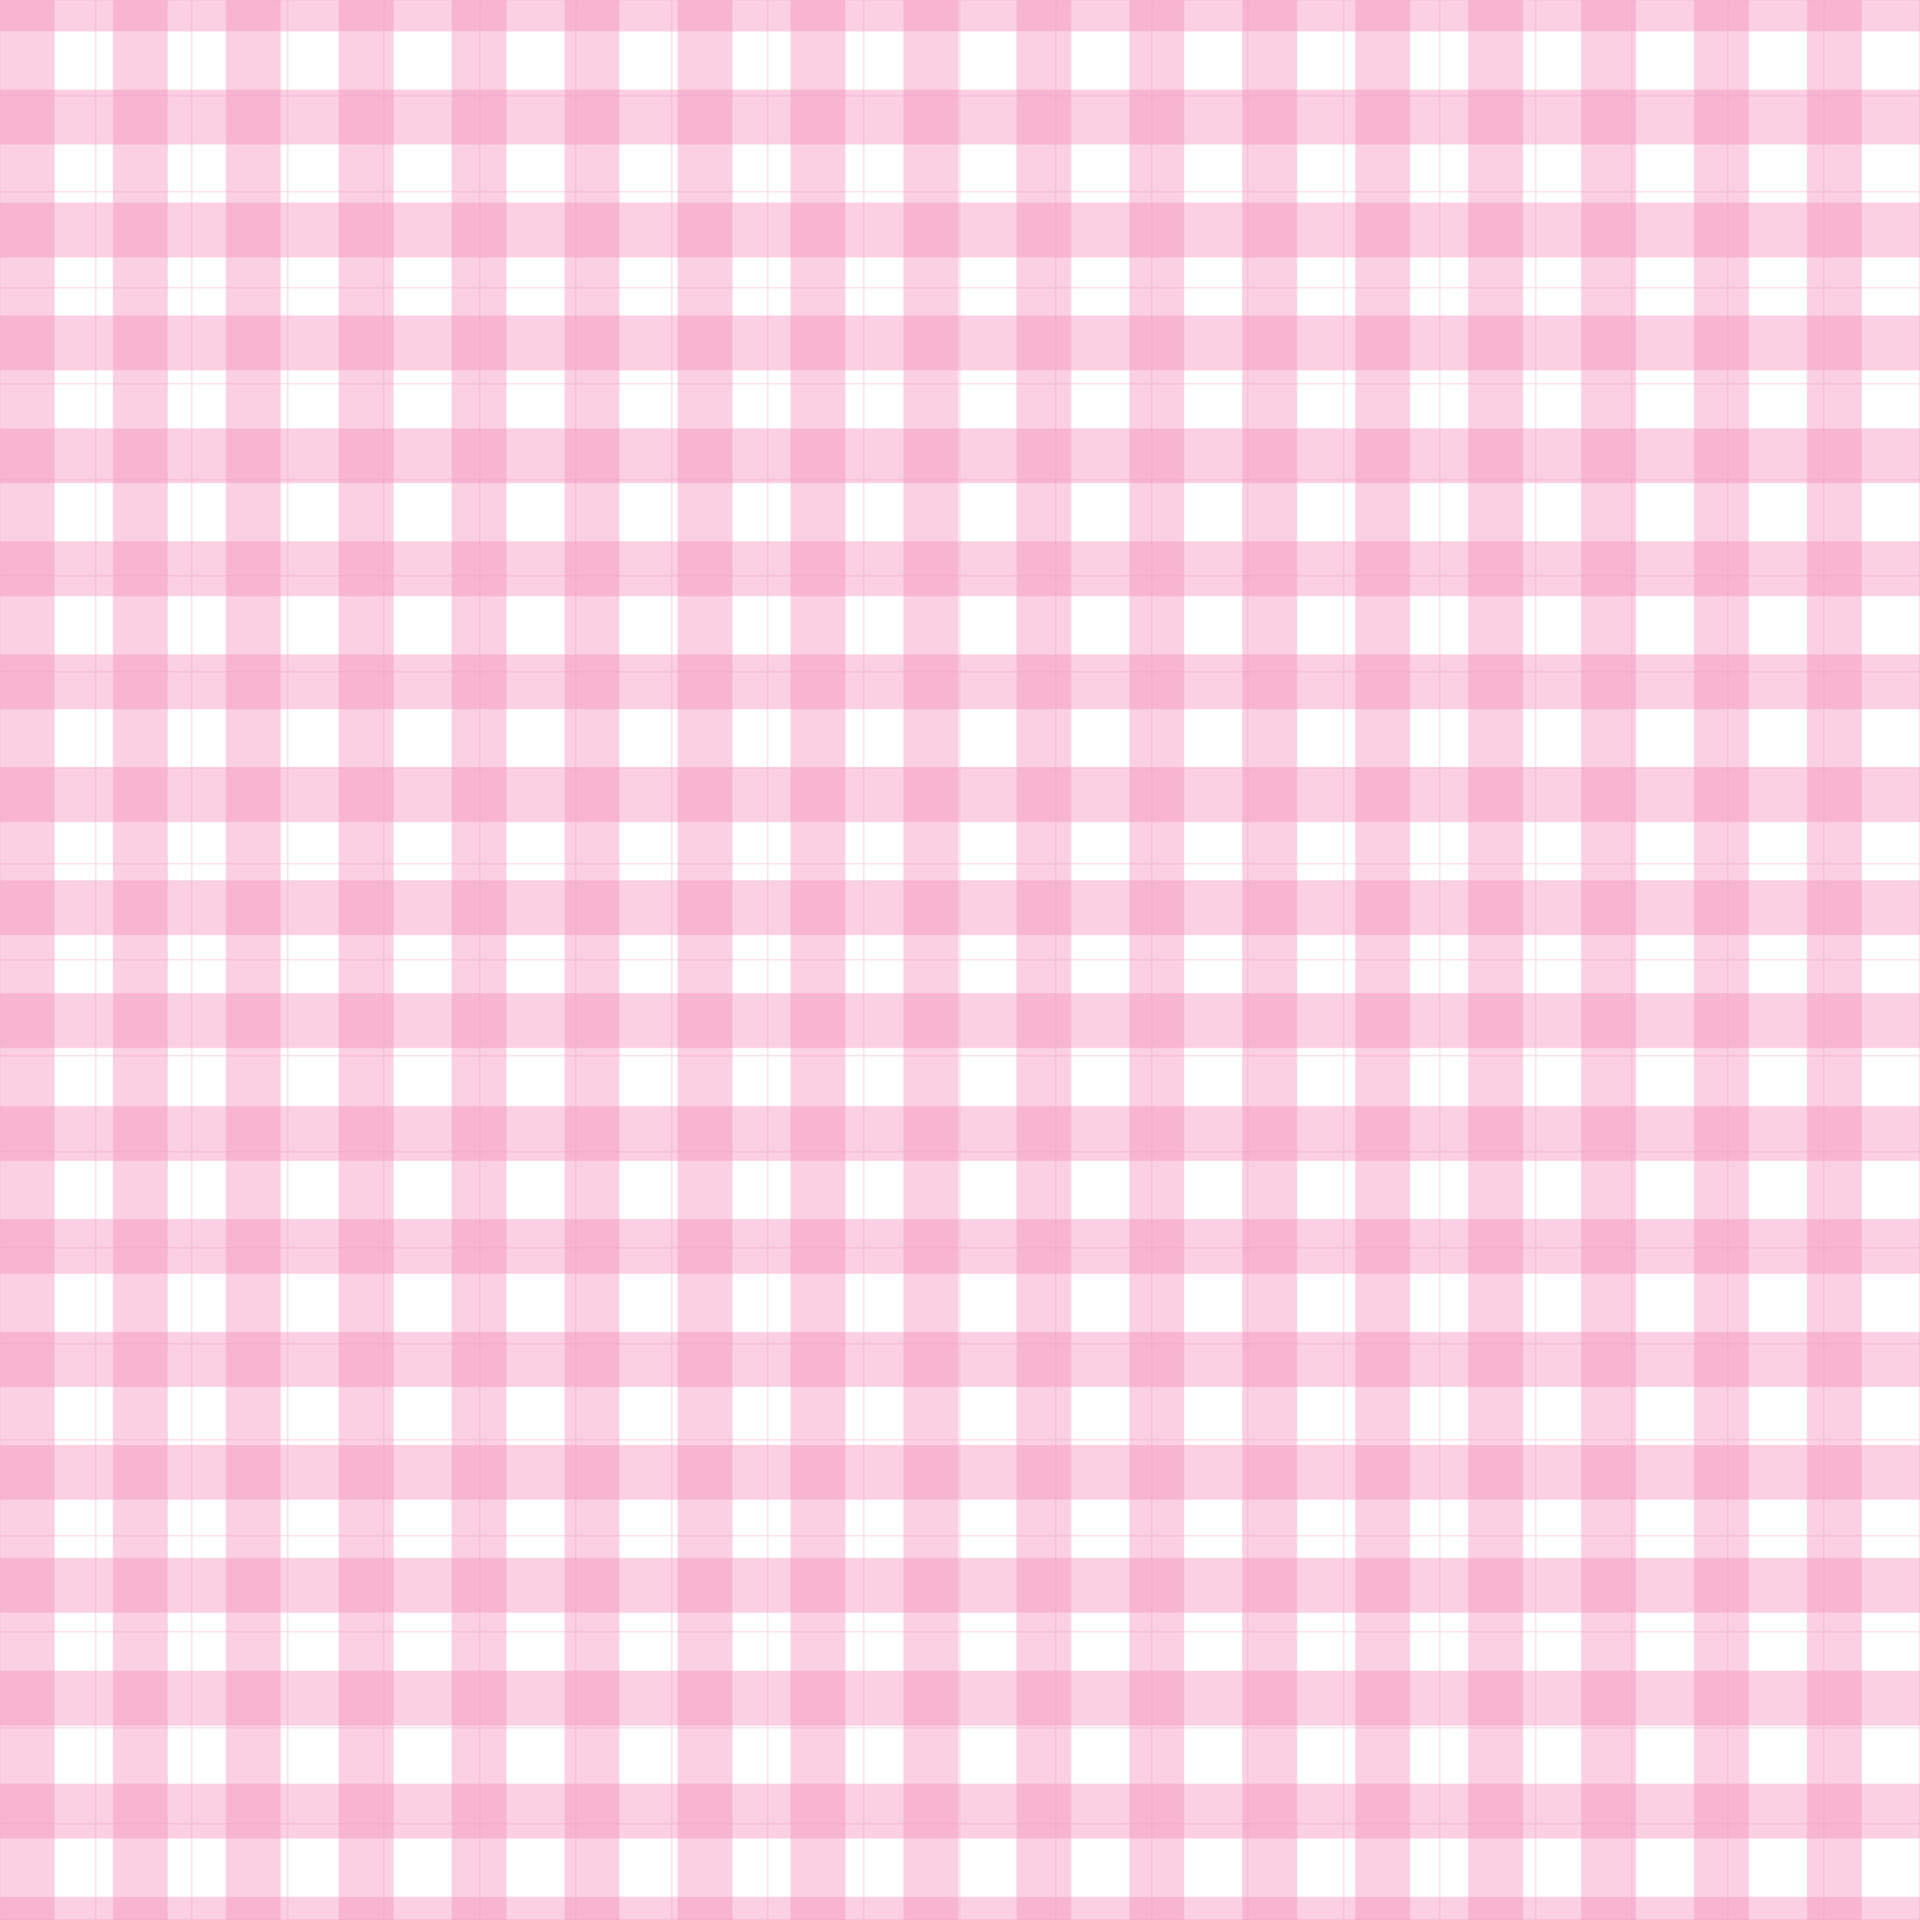 Pink and Black Check Wallpaper for iPhone Free PNG ImageIllustoon